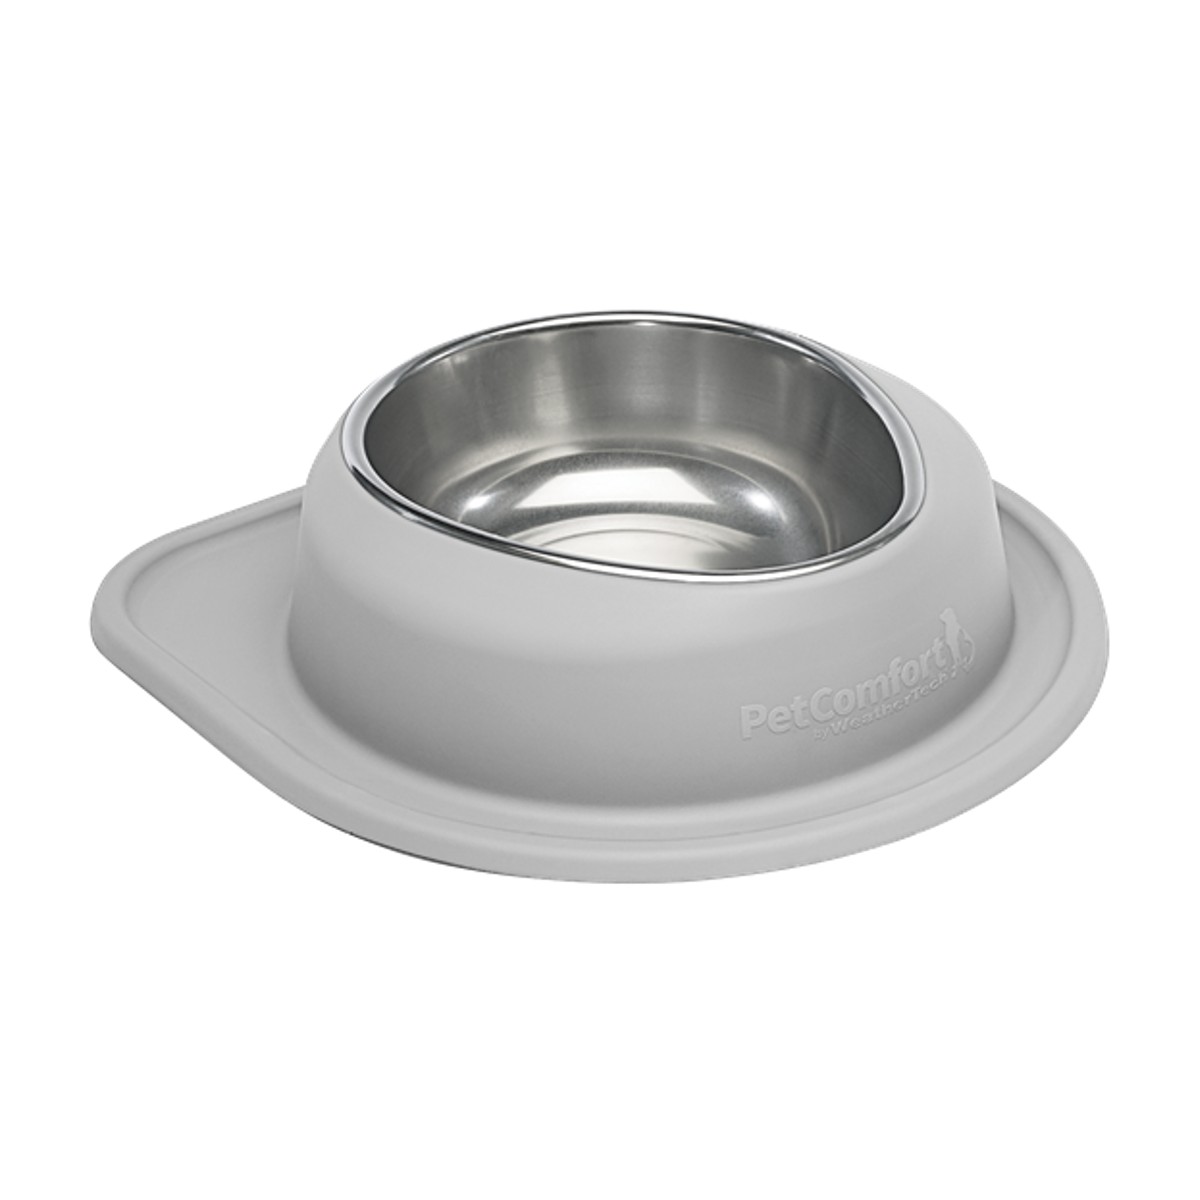 WeatherTech Low Single Diner with Stainless Steel Dog Bowl - Light Gray